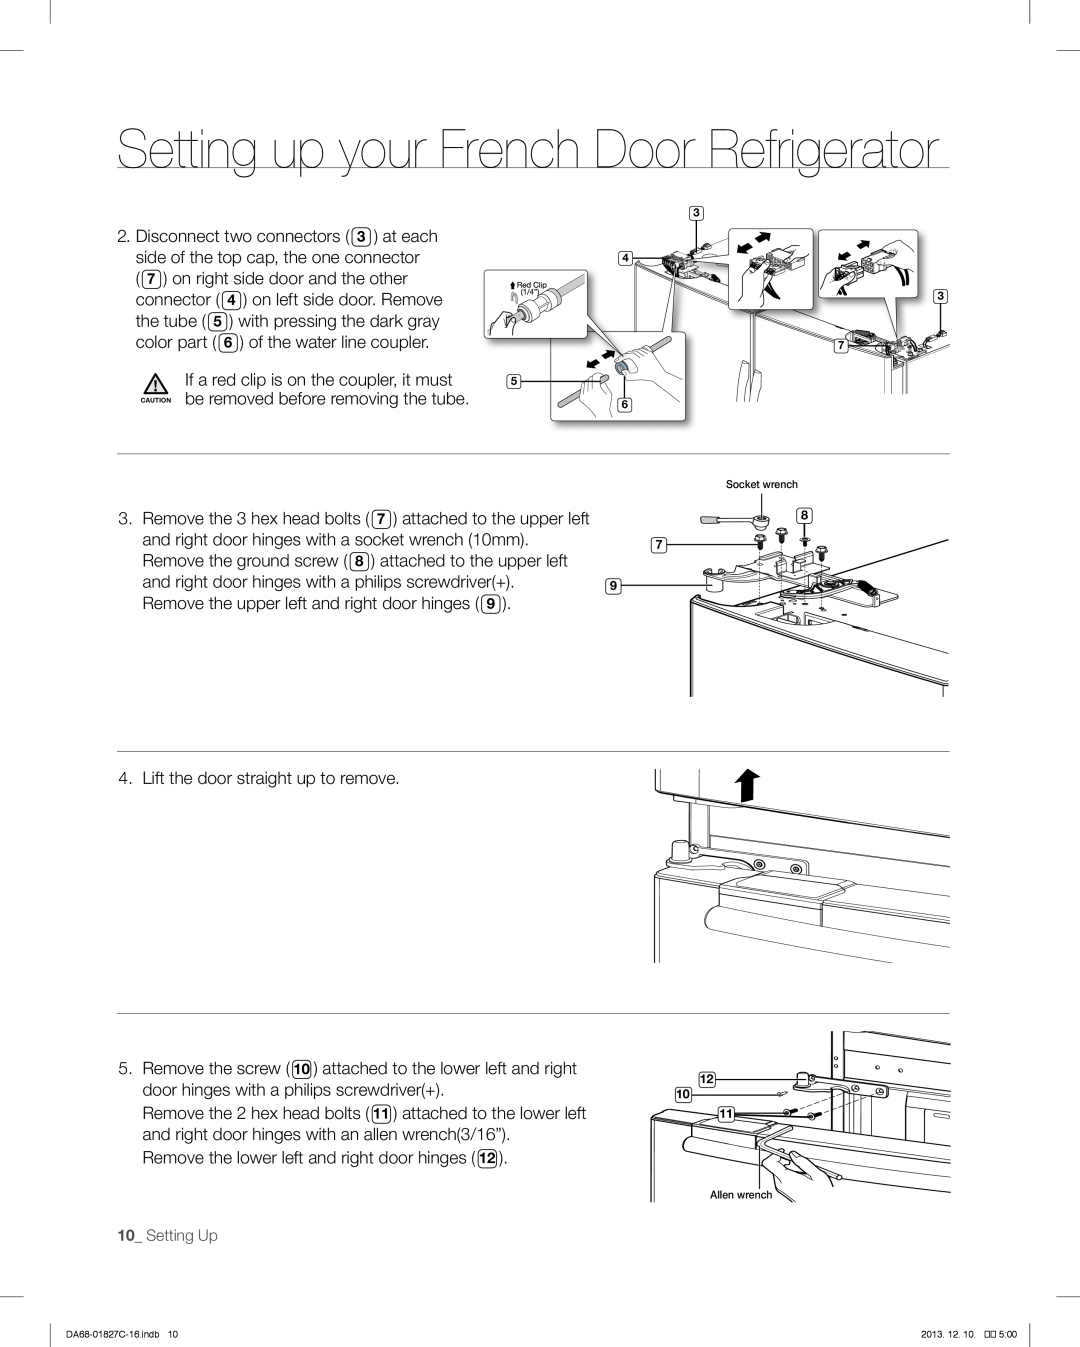 Samsung RFG237AARS user manual Setting up your French Door Refrigerator, Disconnect two connectors 3 at each 